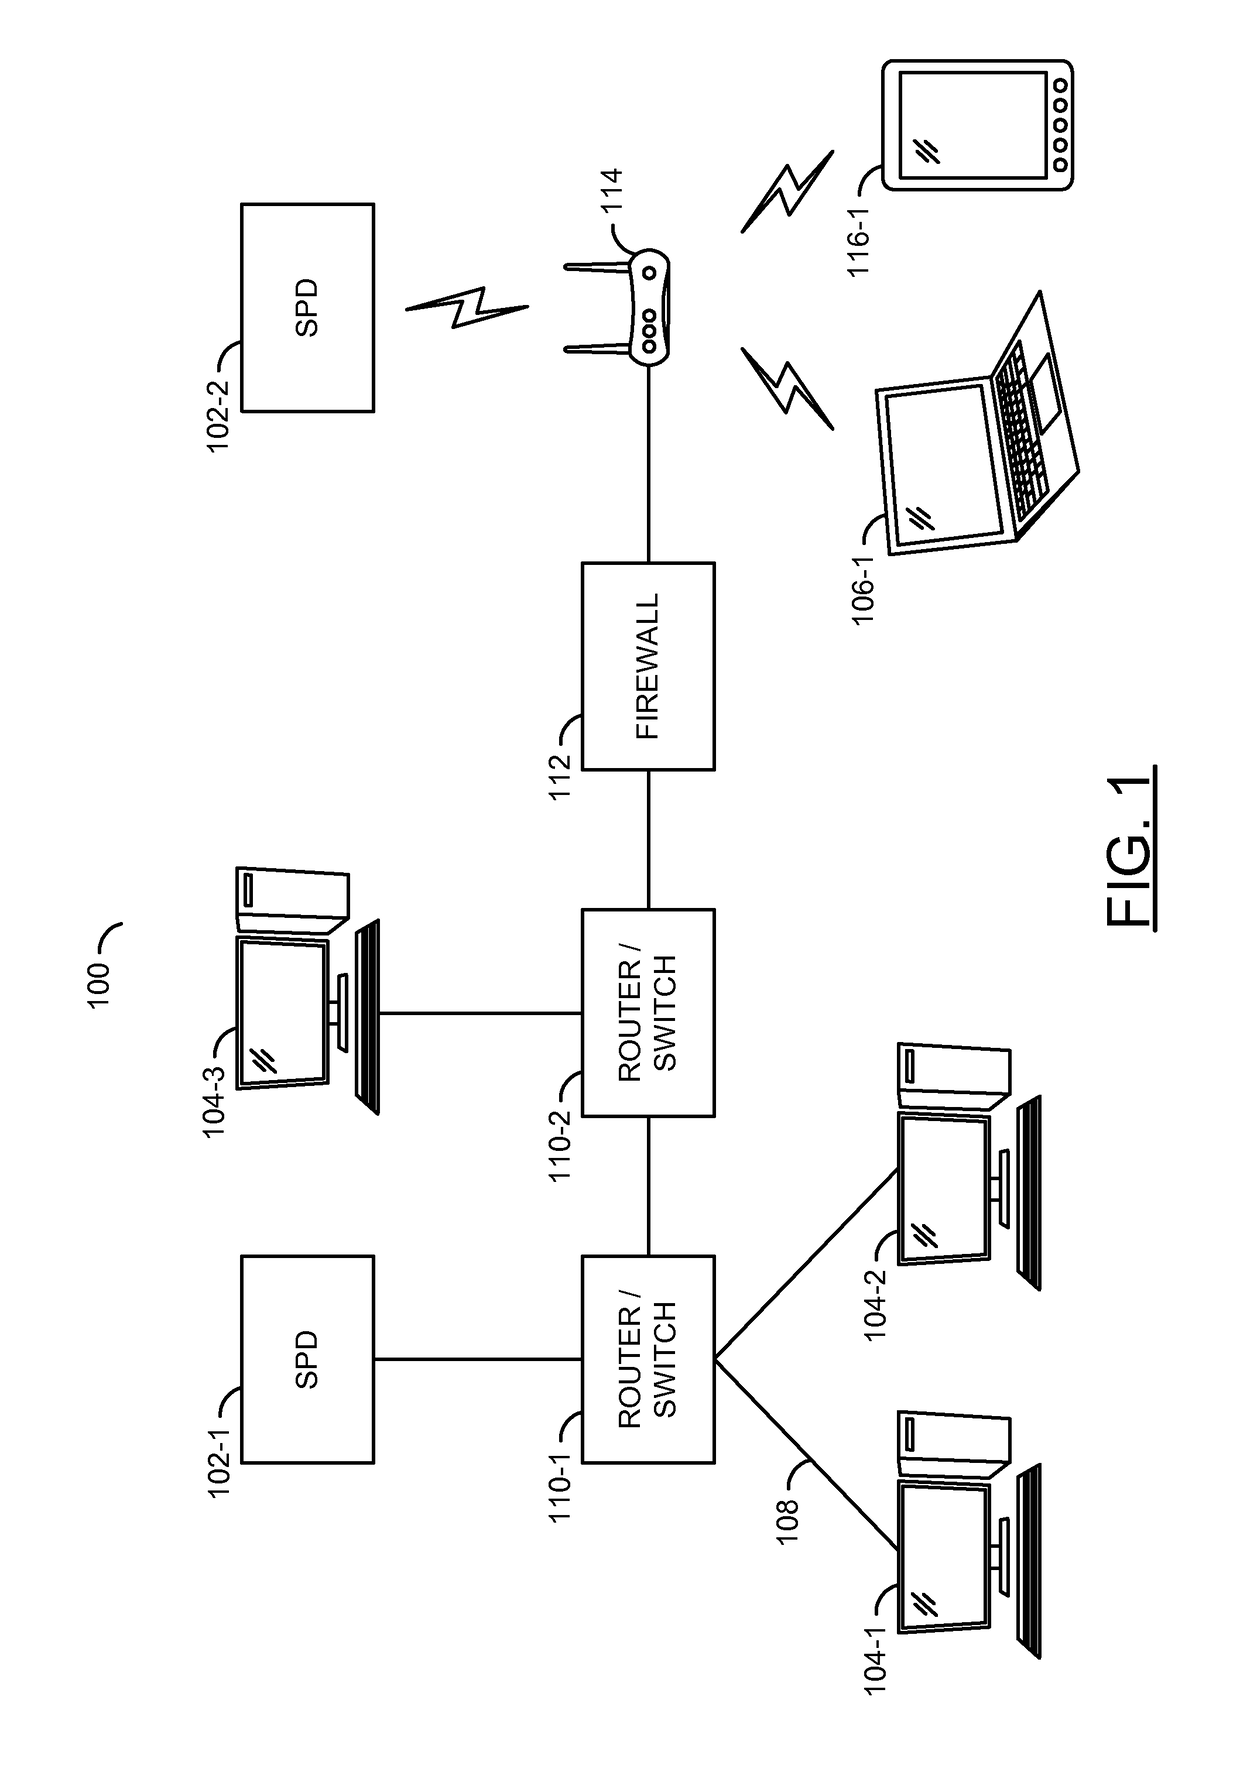 Smart security device with monitoring mode and communication mode